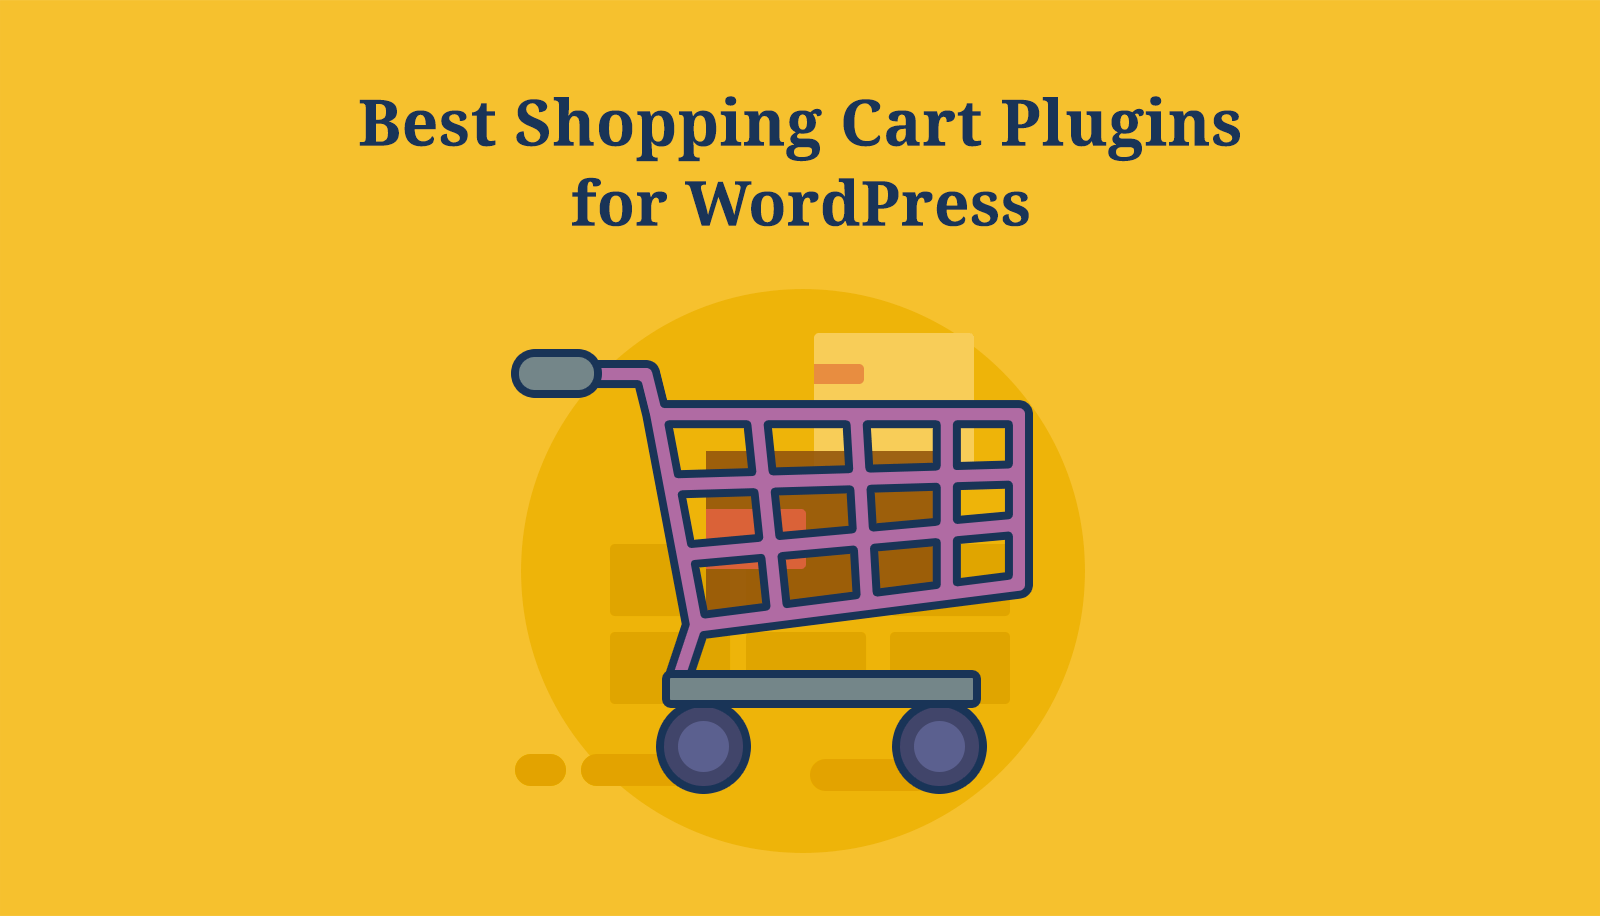 Performance sneeze Retired WordPress Shopping Cart Plugin. How to Select the Best One - MotoPress